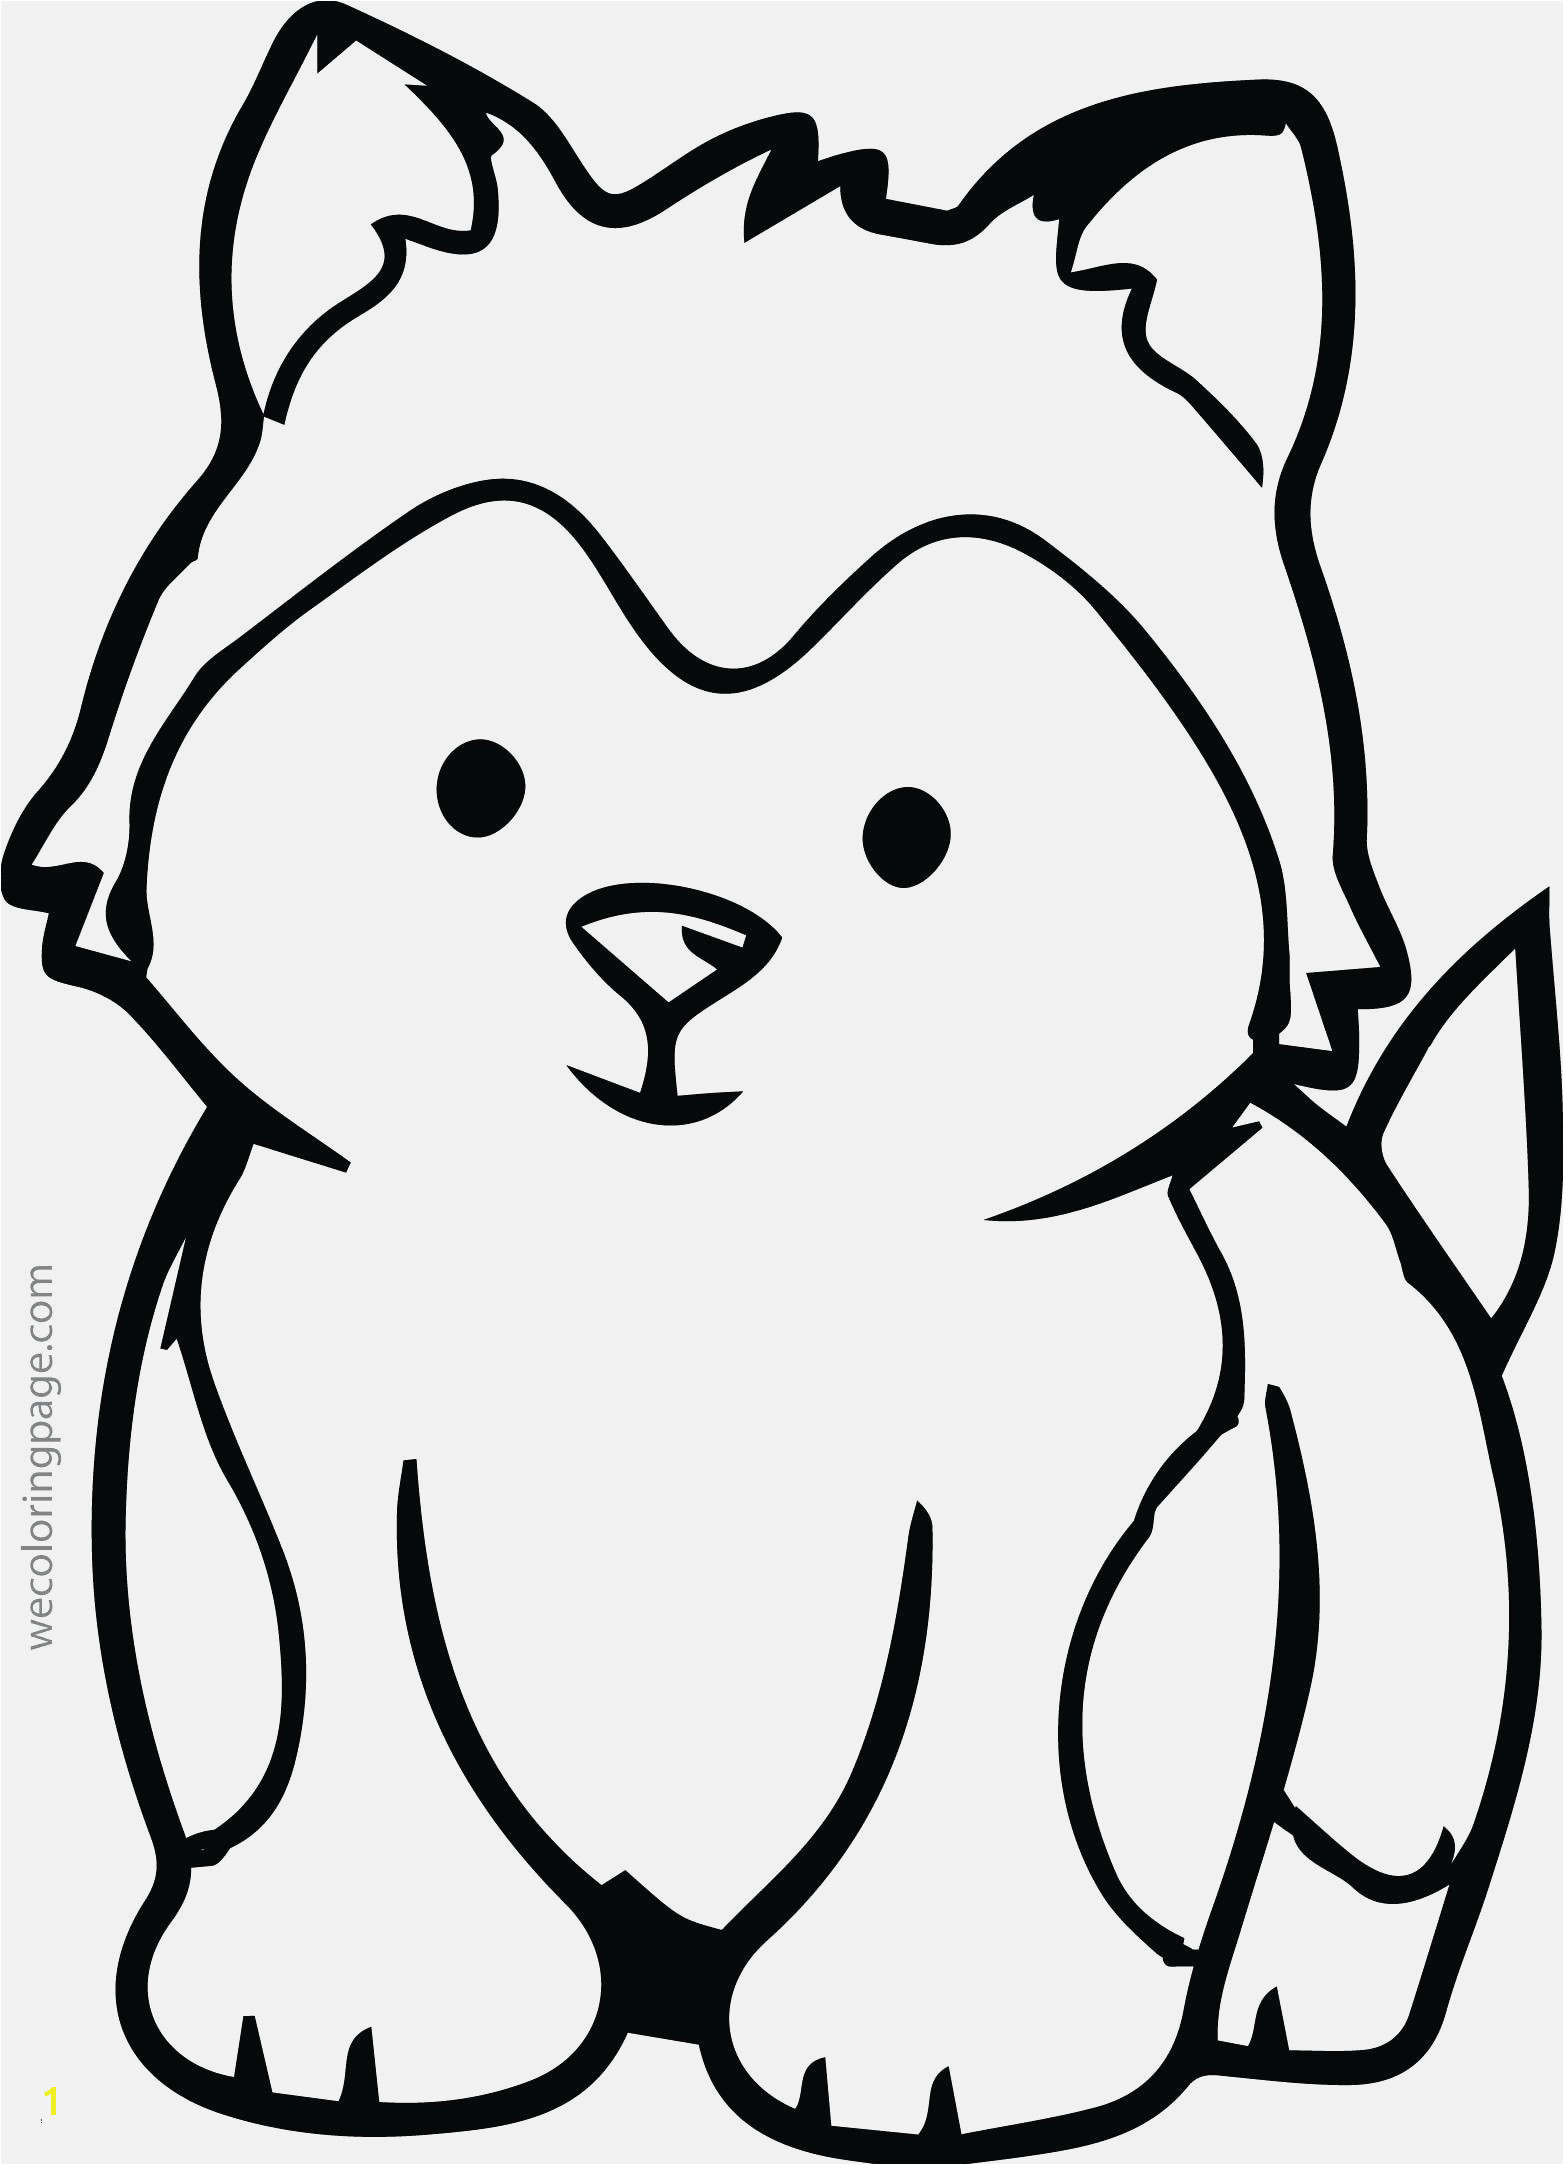 Free Animal Coloring Pages Printable Picture Coloring Lovable Animal Coloring Pages Elegant Husky Free Animal